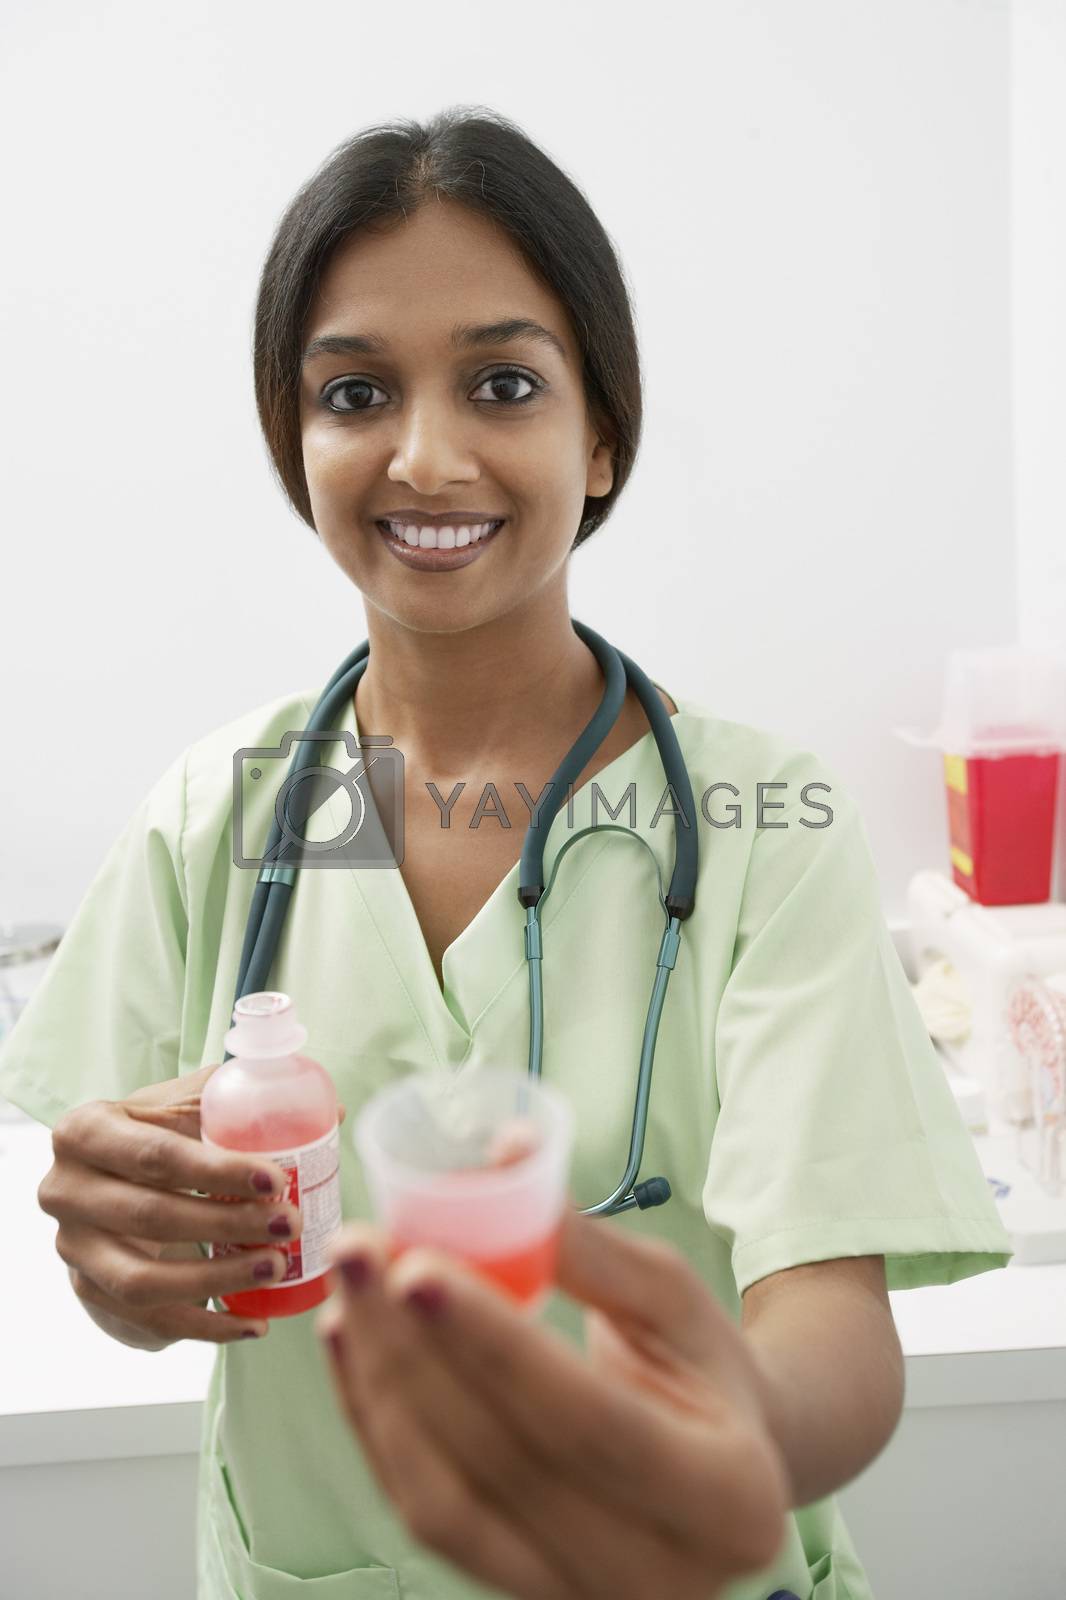 Royalty free image of Doctor giving medicine by moodboard